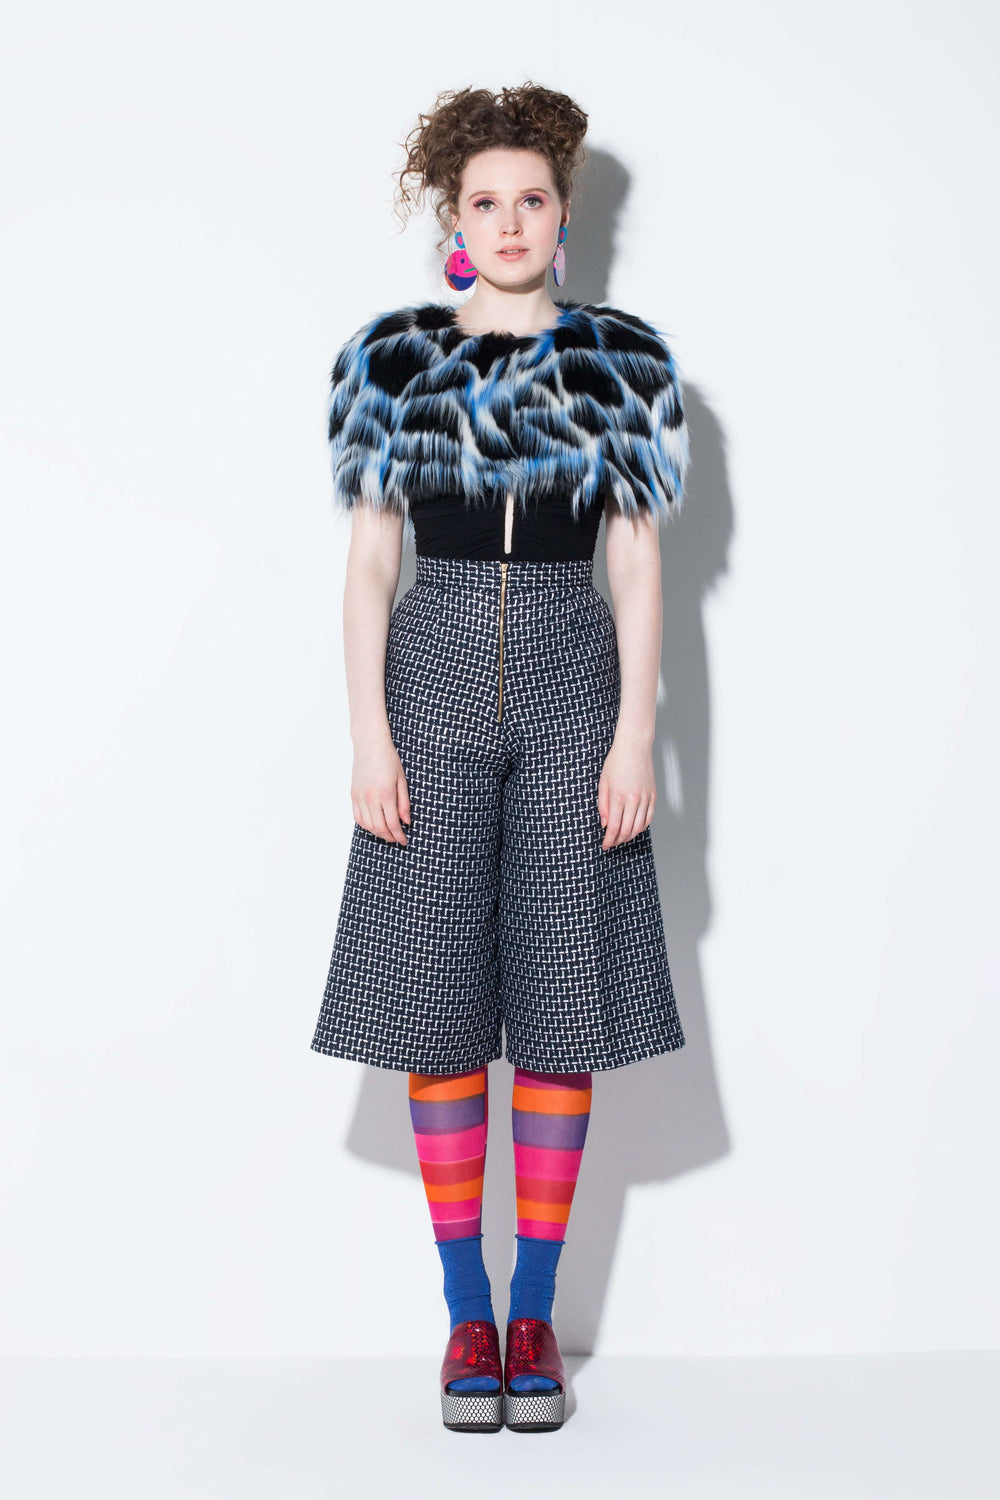  3 seasons| a practical faux fur capelete accessory from jin & yin styled with hand-painted tights